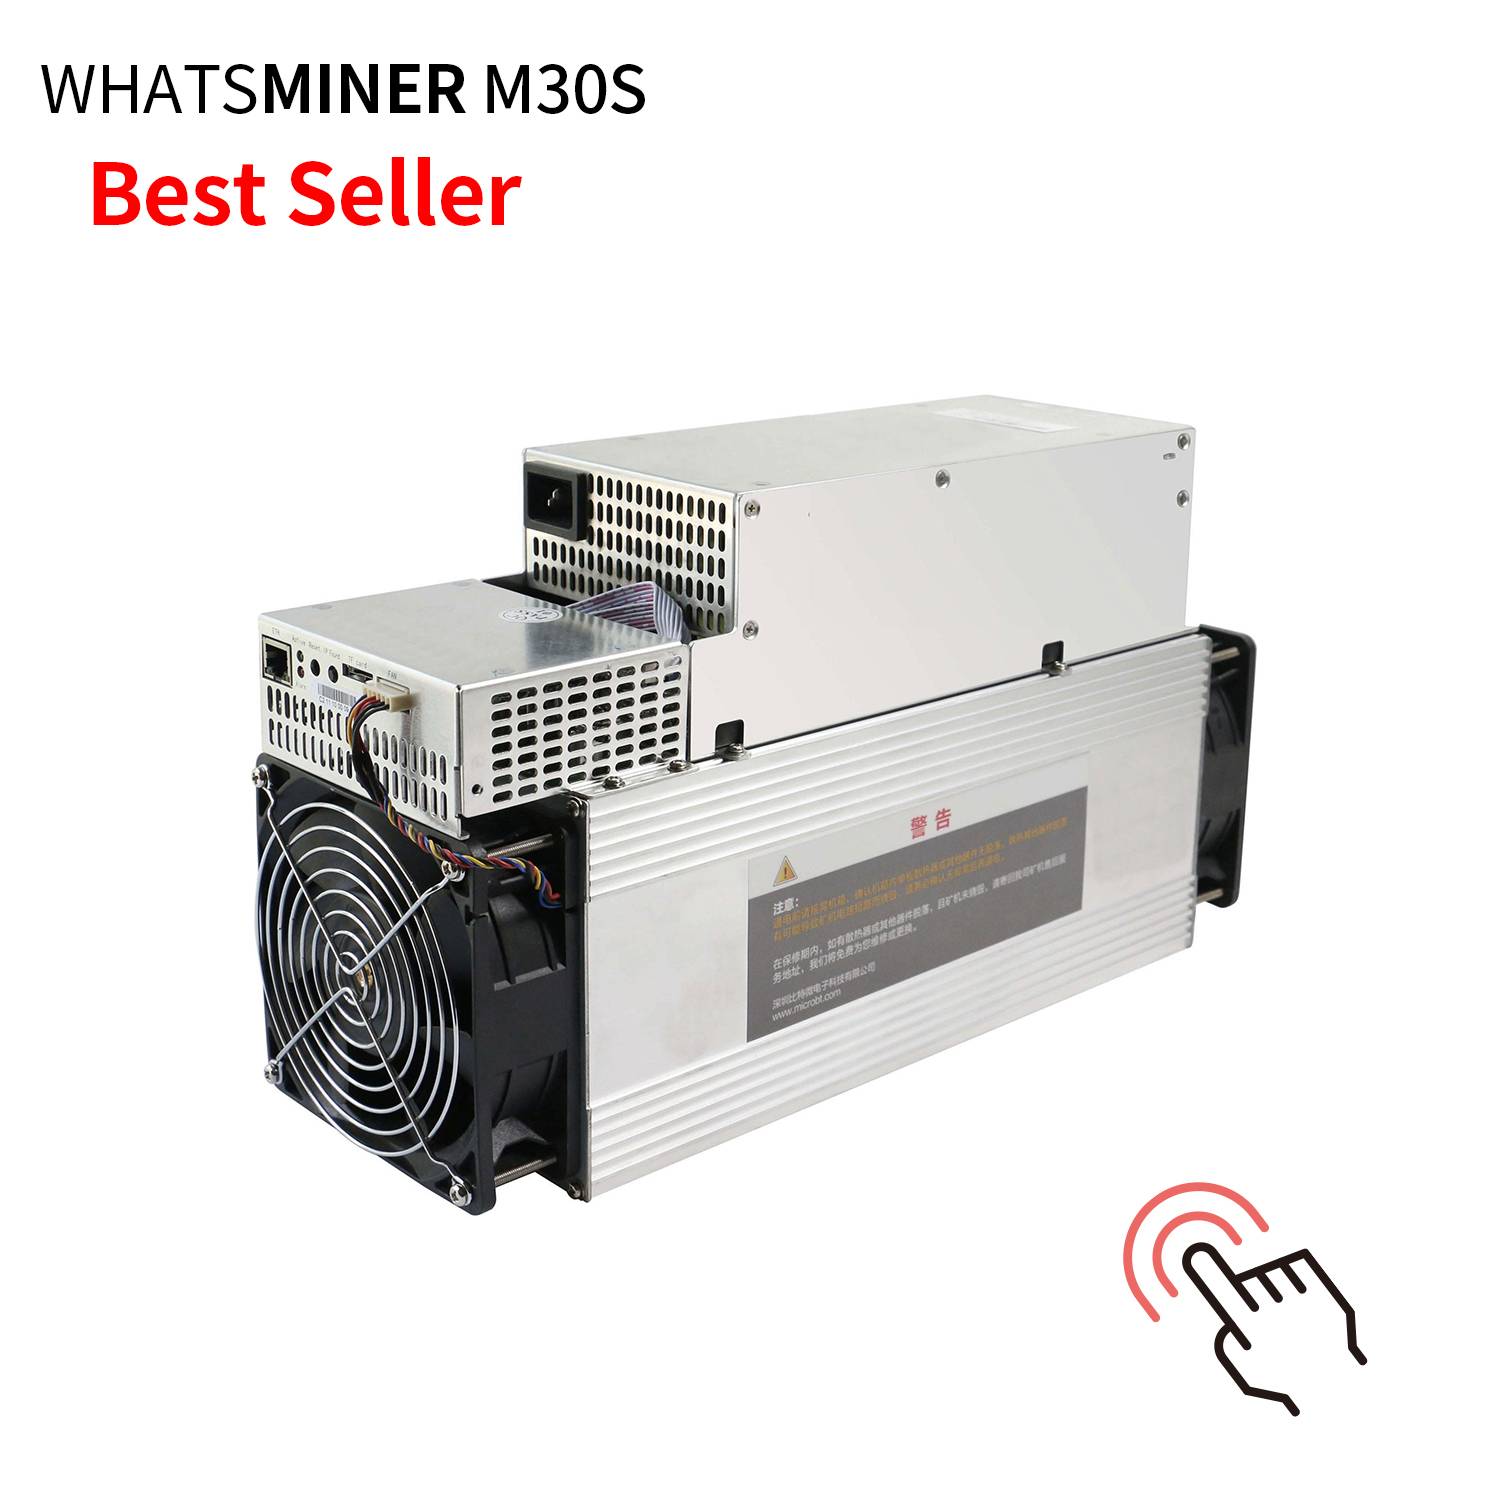 Factory wholesale Bitcoin Miner Price – 2020 New Release High Hashrate WHATSMINER m30s 86T 88T 3268W Bitcoin Mining Machine – Skycorp